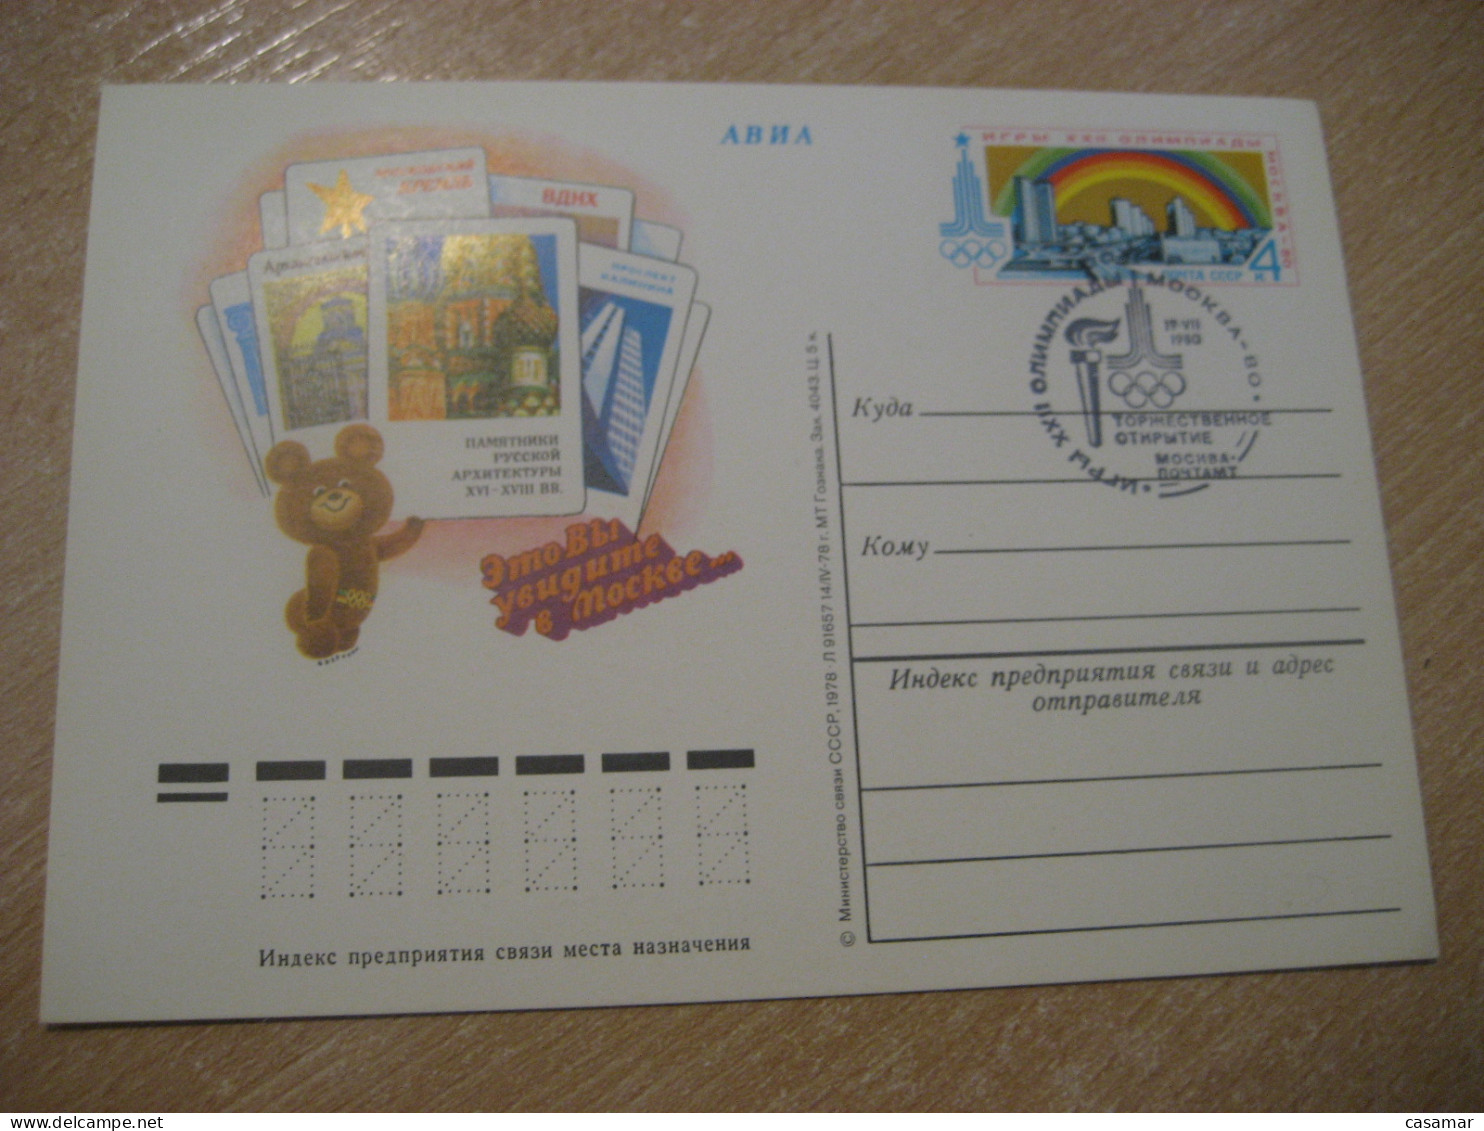 1980 Olympic Mascot Moscow Olympic Games Olympics Torch Cancel Postal Stationery Card RUSSIA USSR - Sommer 1980: Moskau